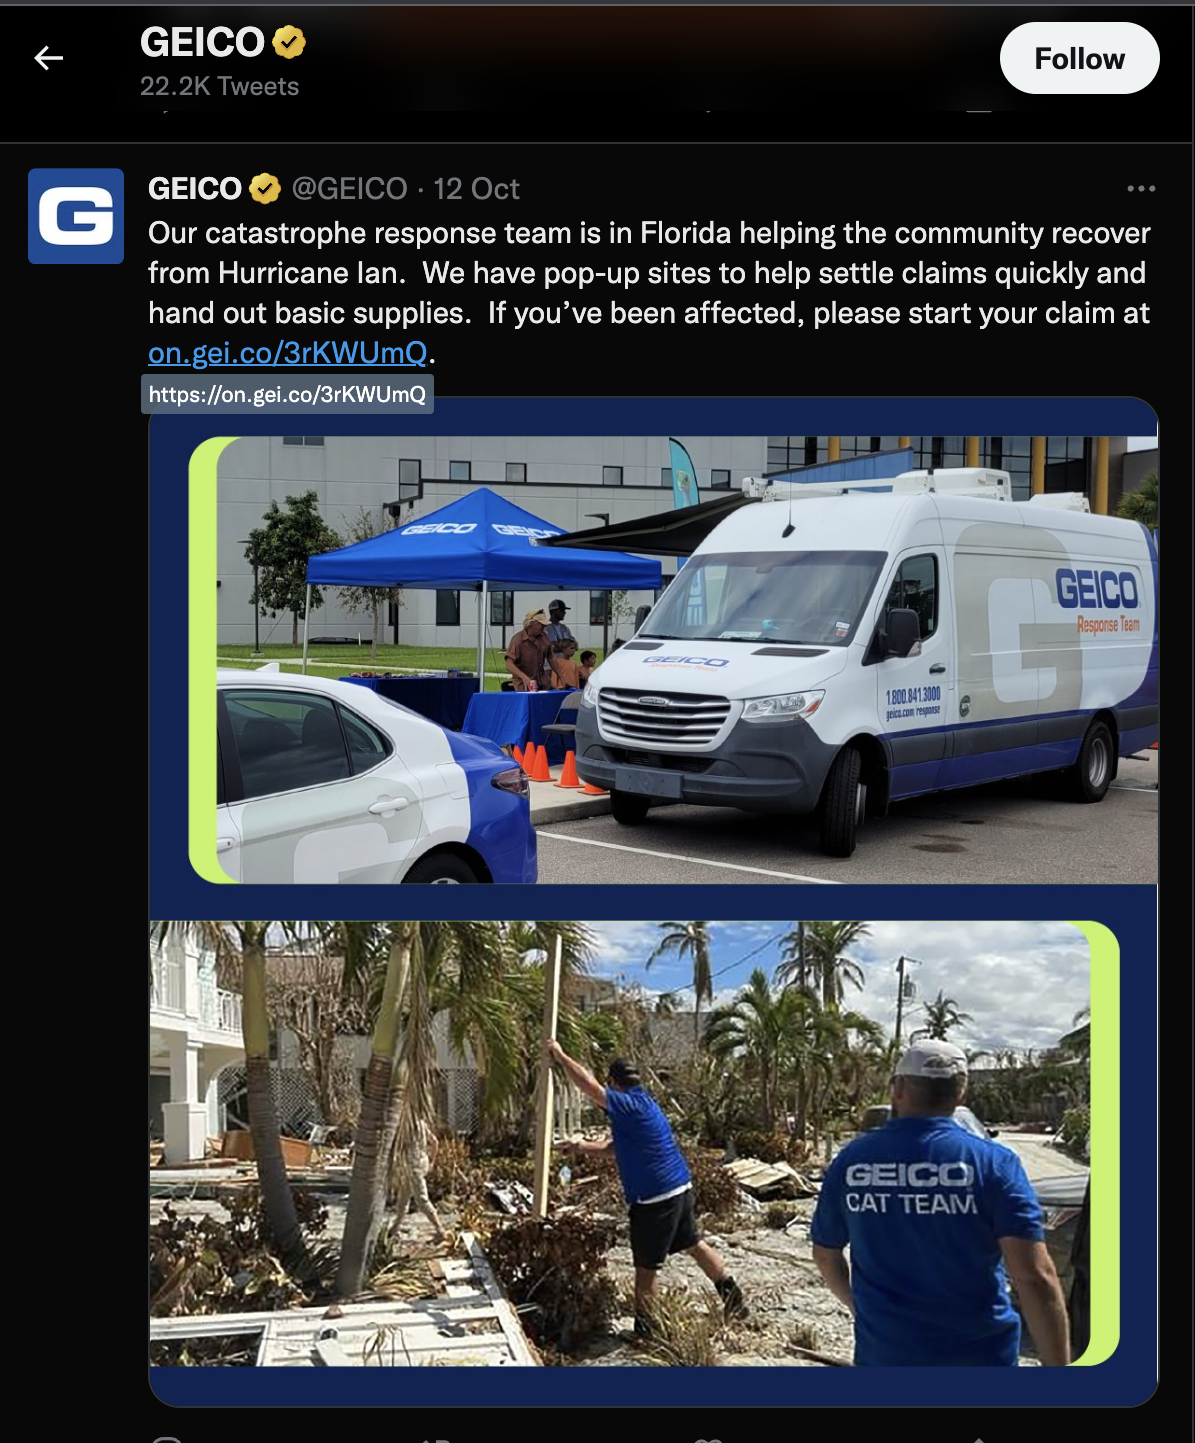 An image showing how Geico keeps its customers informed on Twitter.